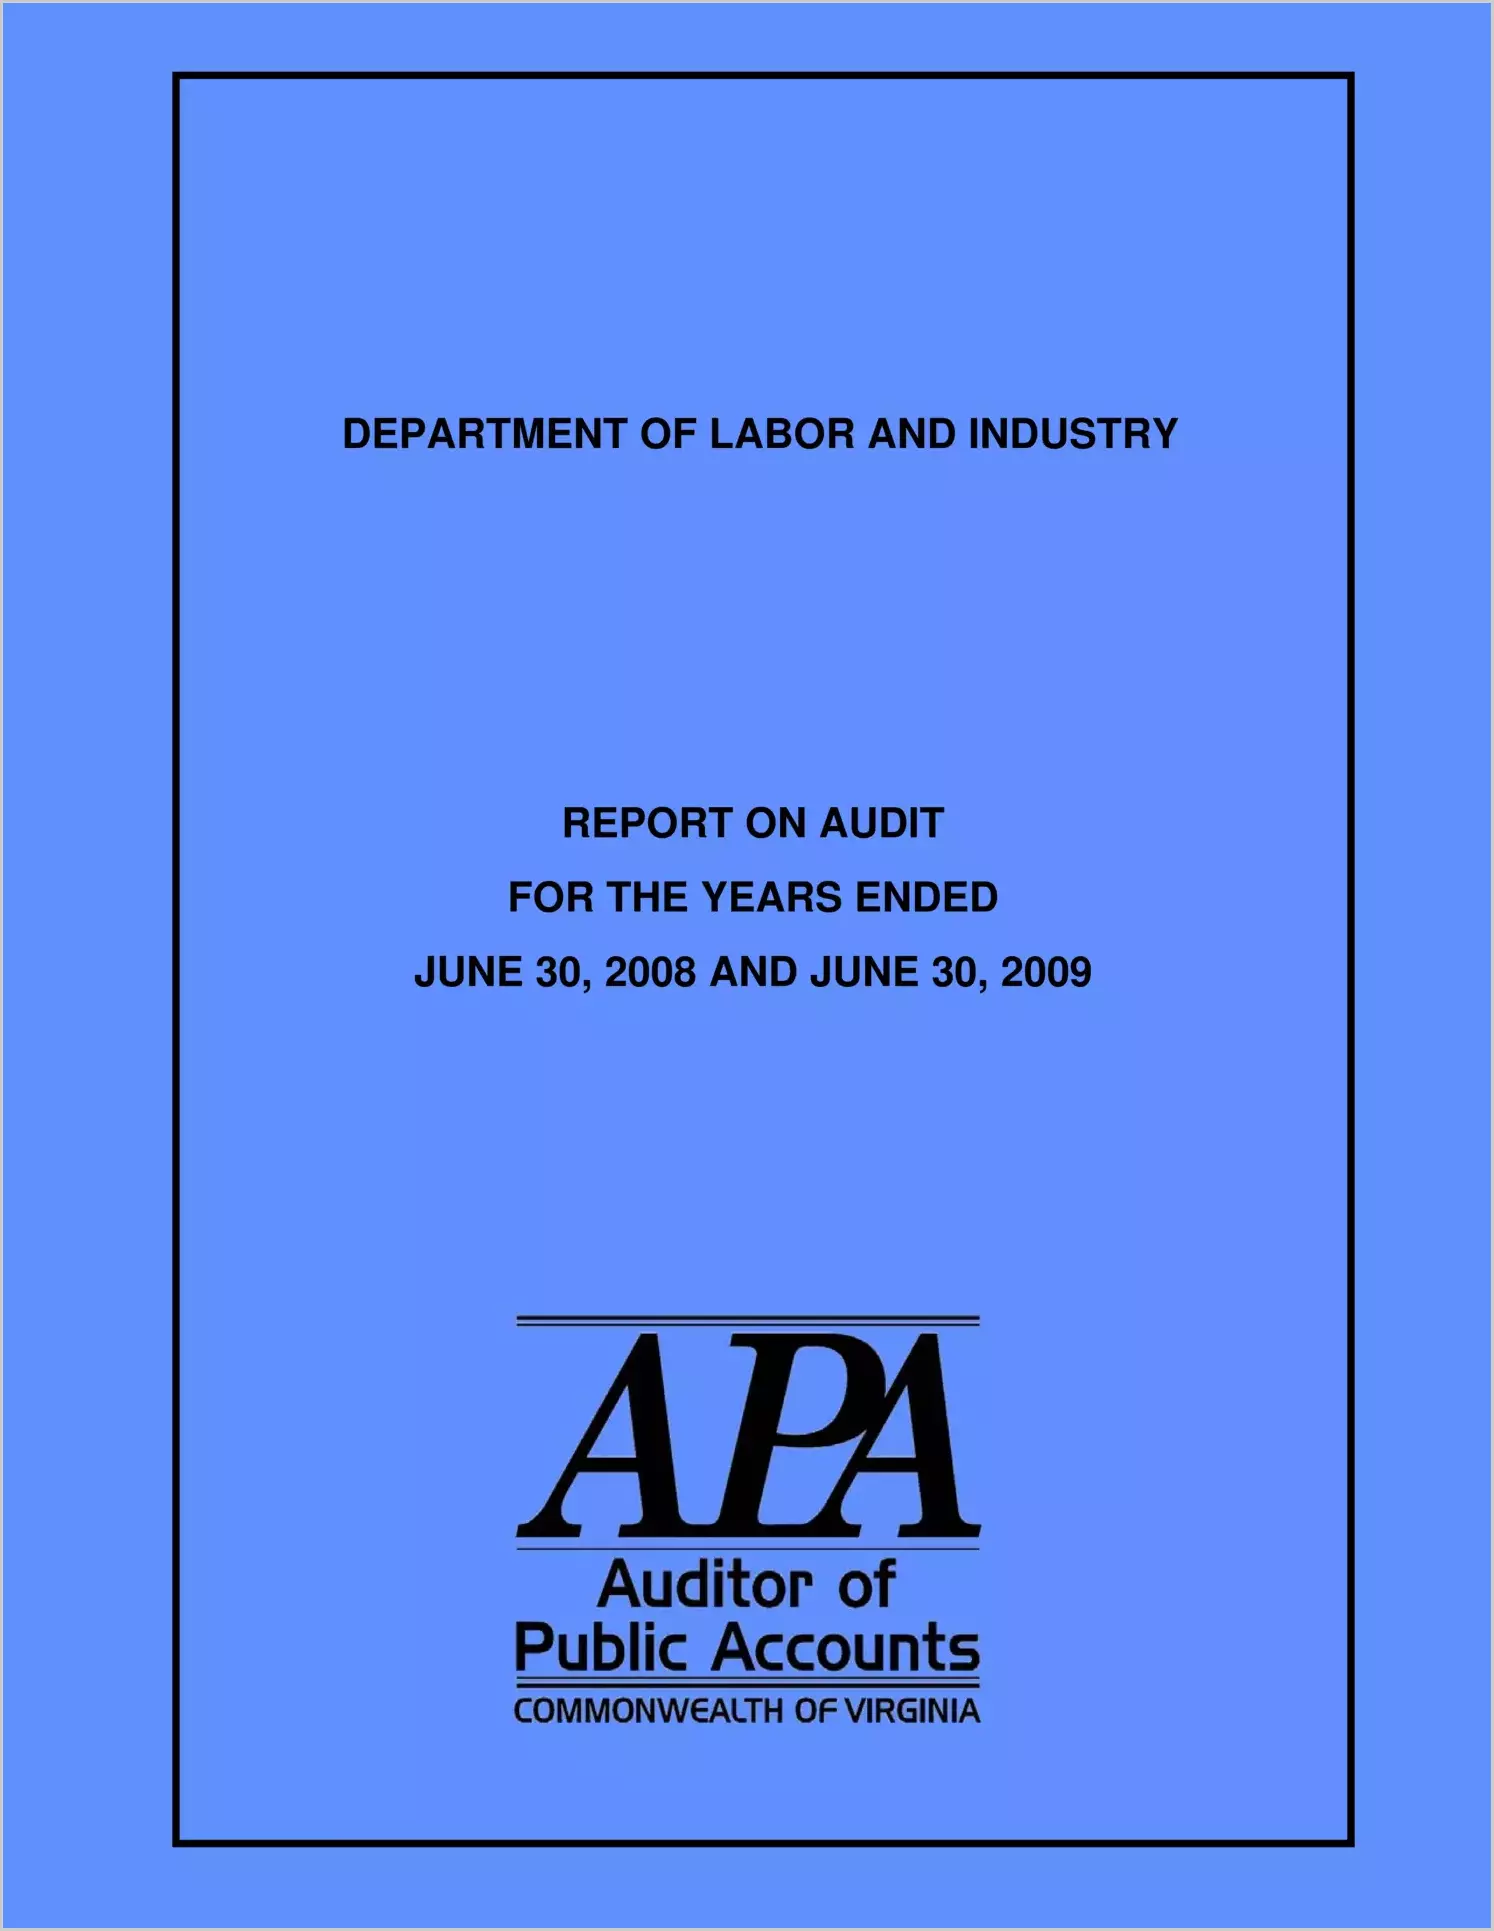 Department of Labor and Industry Report on Audit for the years ended June 30, 2008 and June 30, 2009